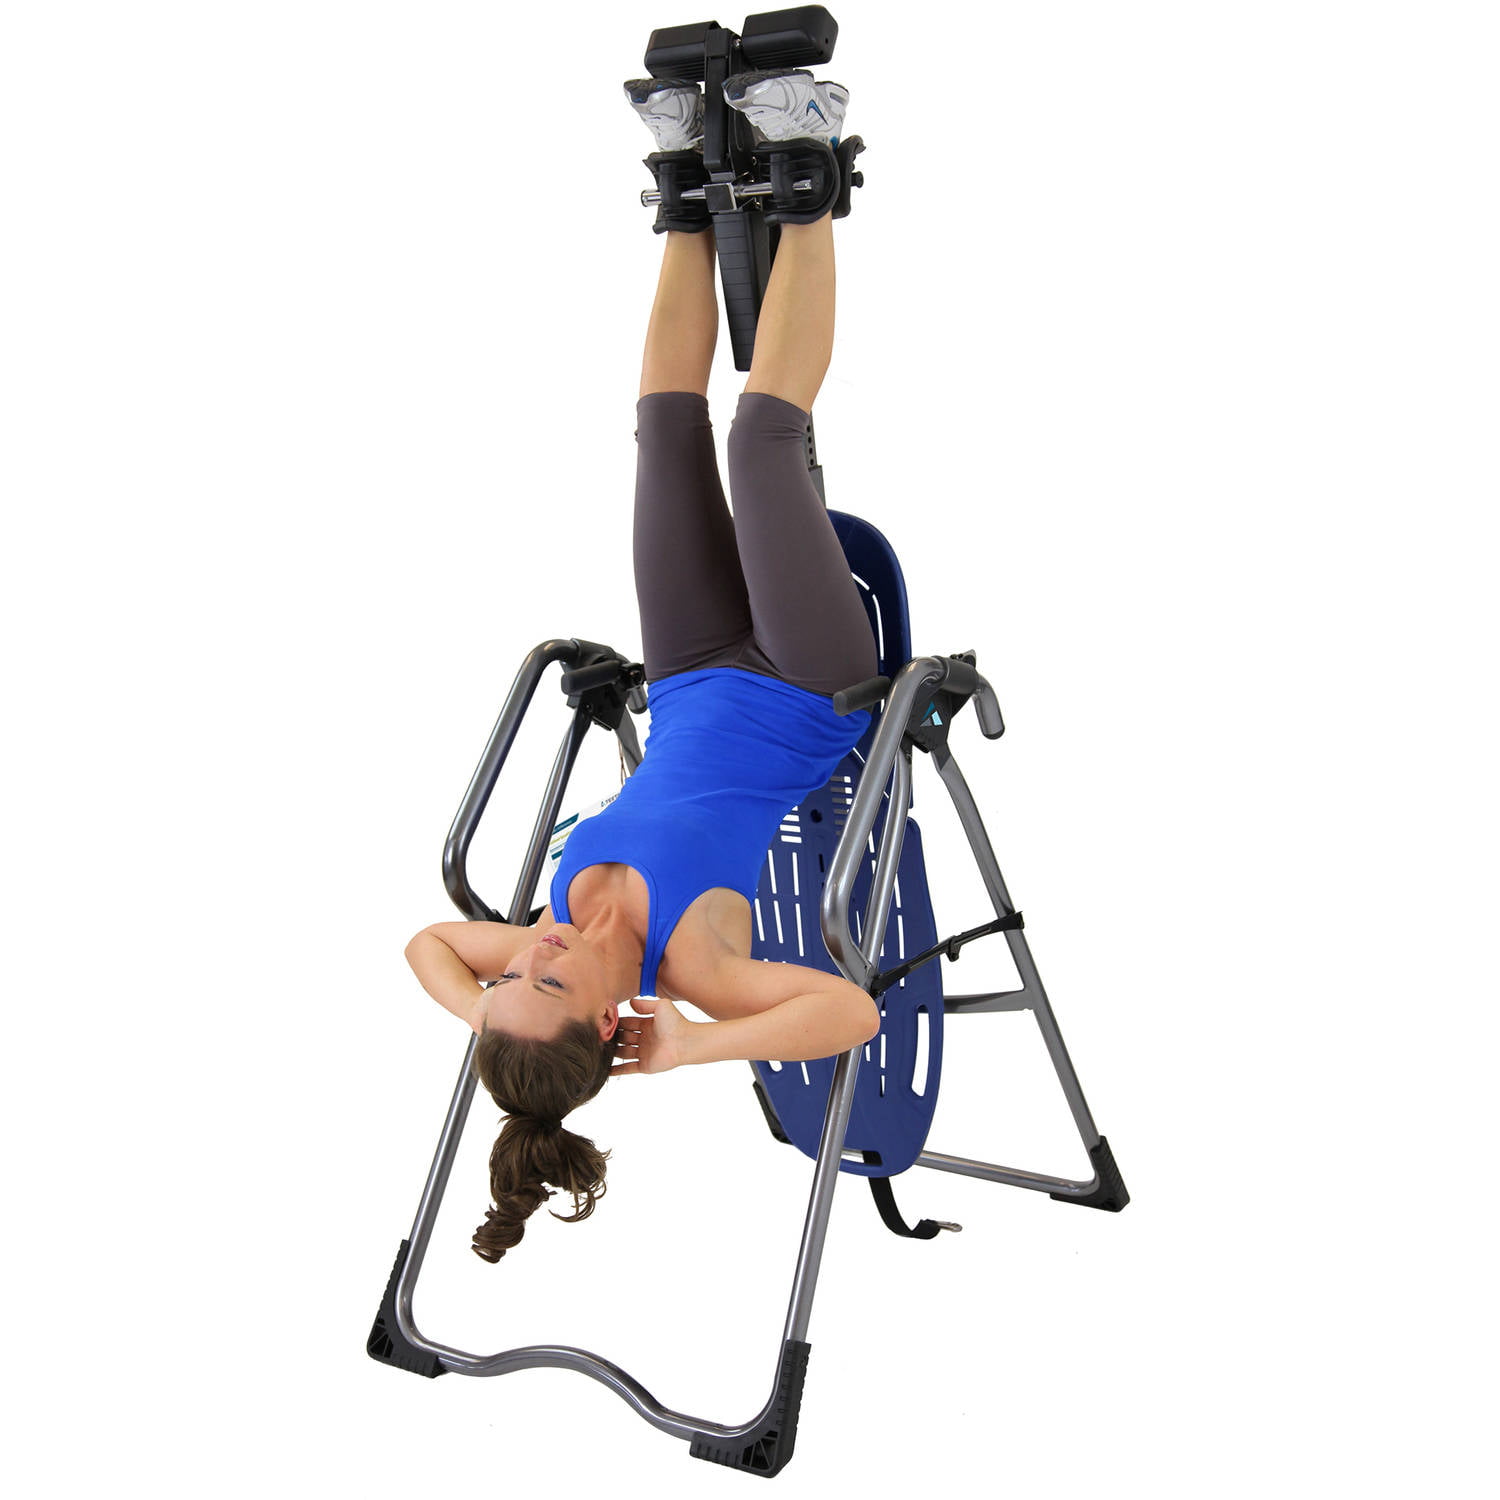 Teeter Hang Ups EP-960 LTD Inversion Table with Back Pain Relief Kit for sale online 